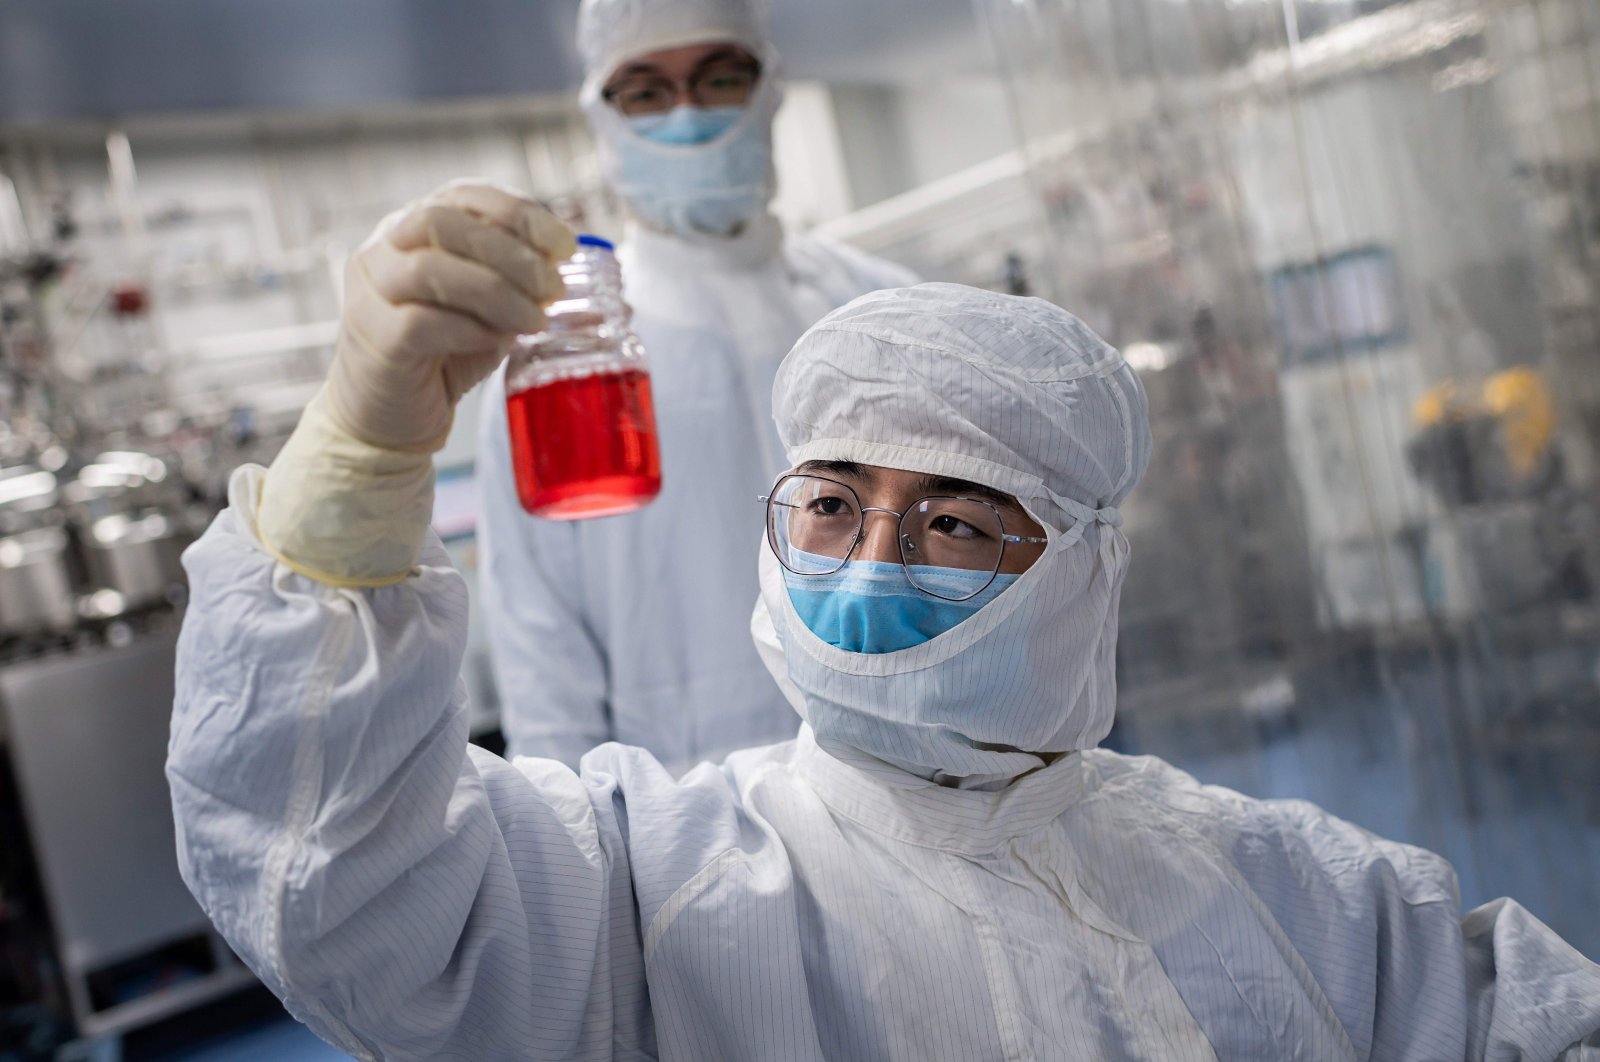 In this April 29, 2020, file photo an engineer looks at monkey kidney cells as he makes a test on an experimental vaccine for the COVID-19 coronavirus inside the Cells Culture Room laboratory at the Sinovac Biotech facilities in Beijing. (Photo by NICOLAS ASFOURI / AFP)